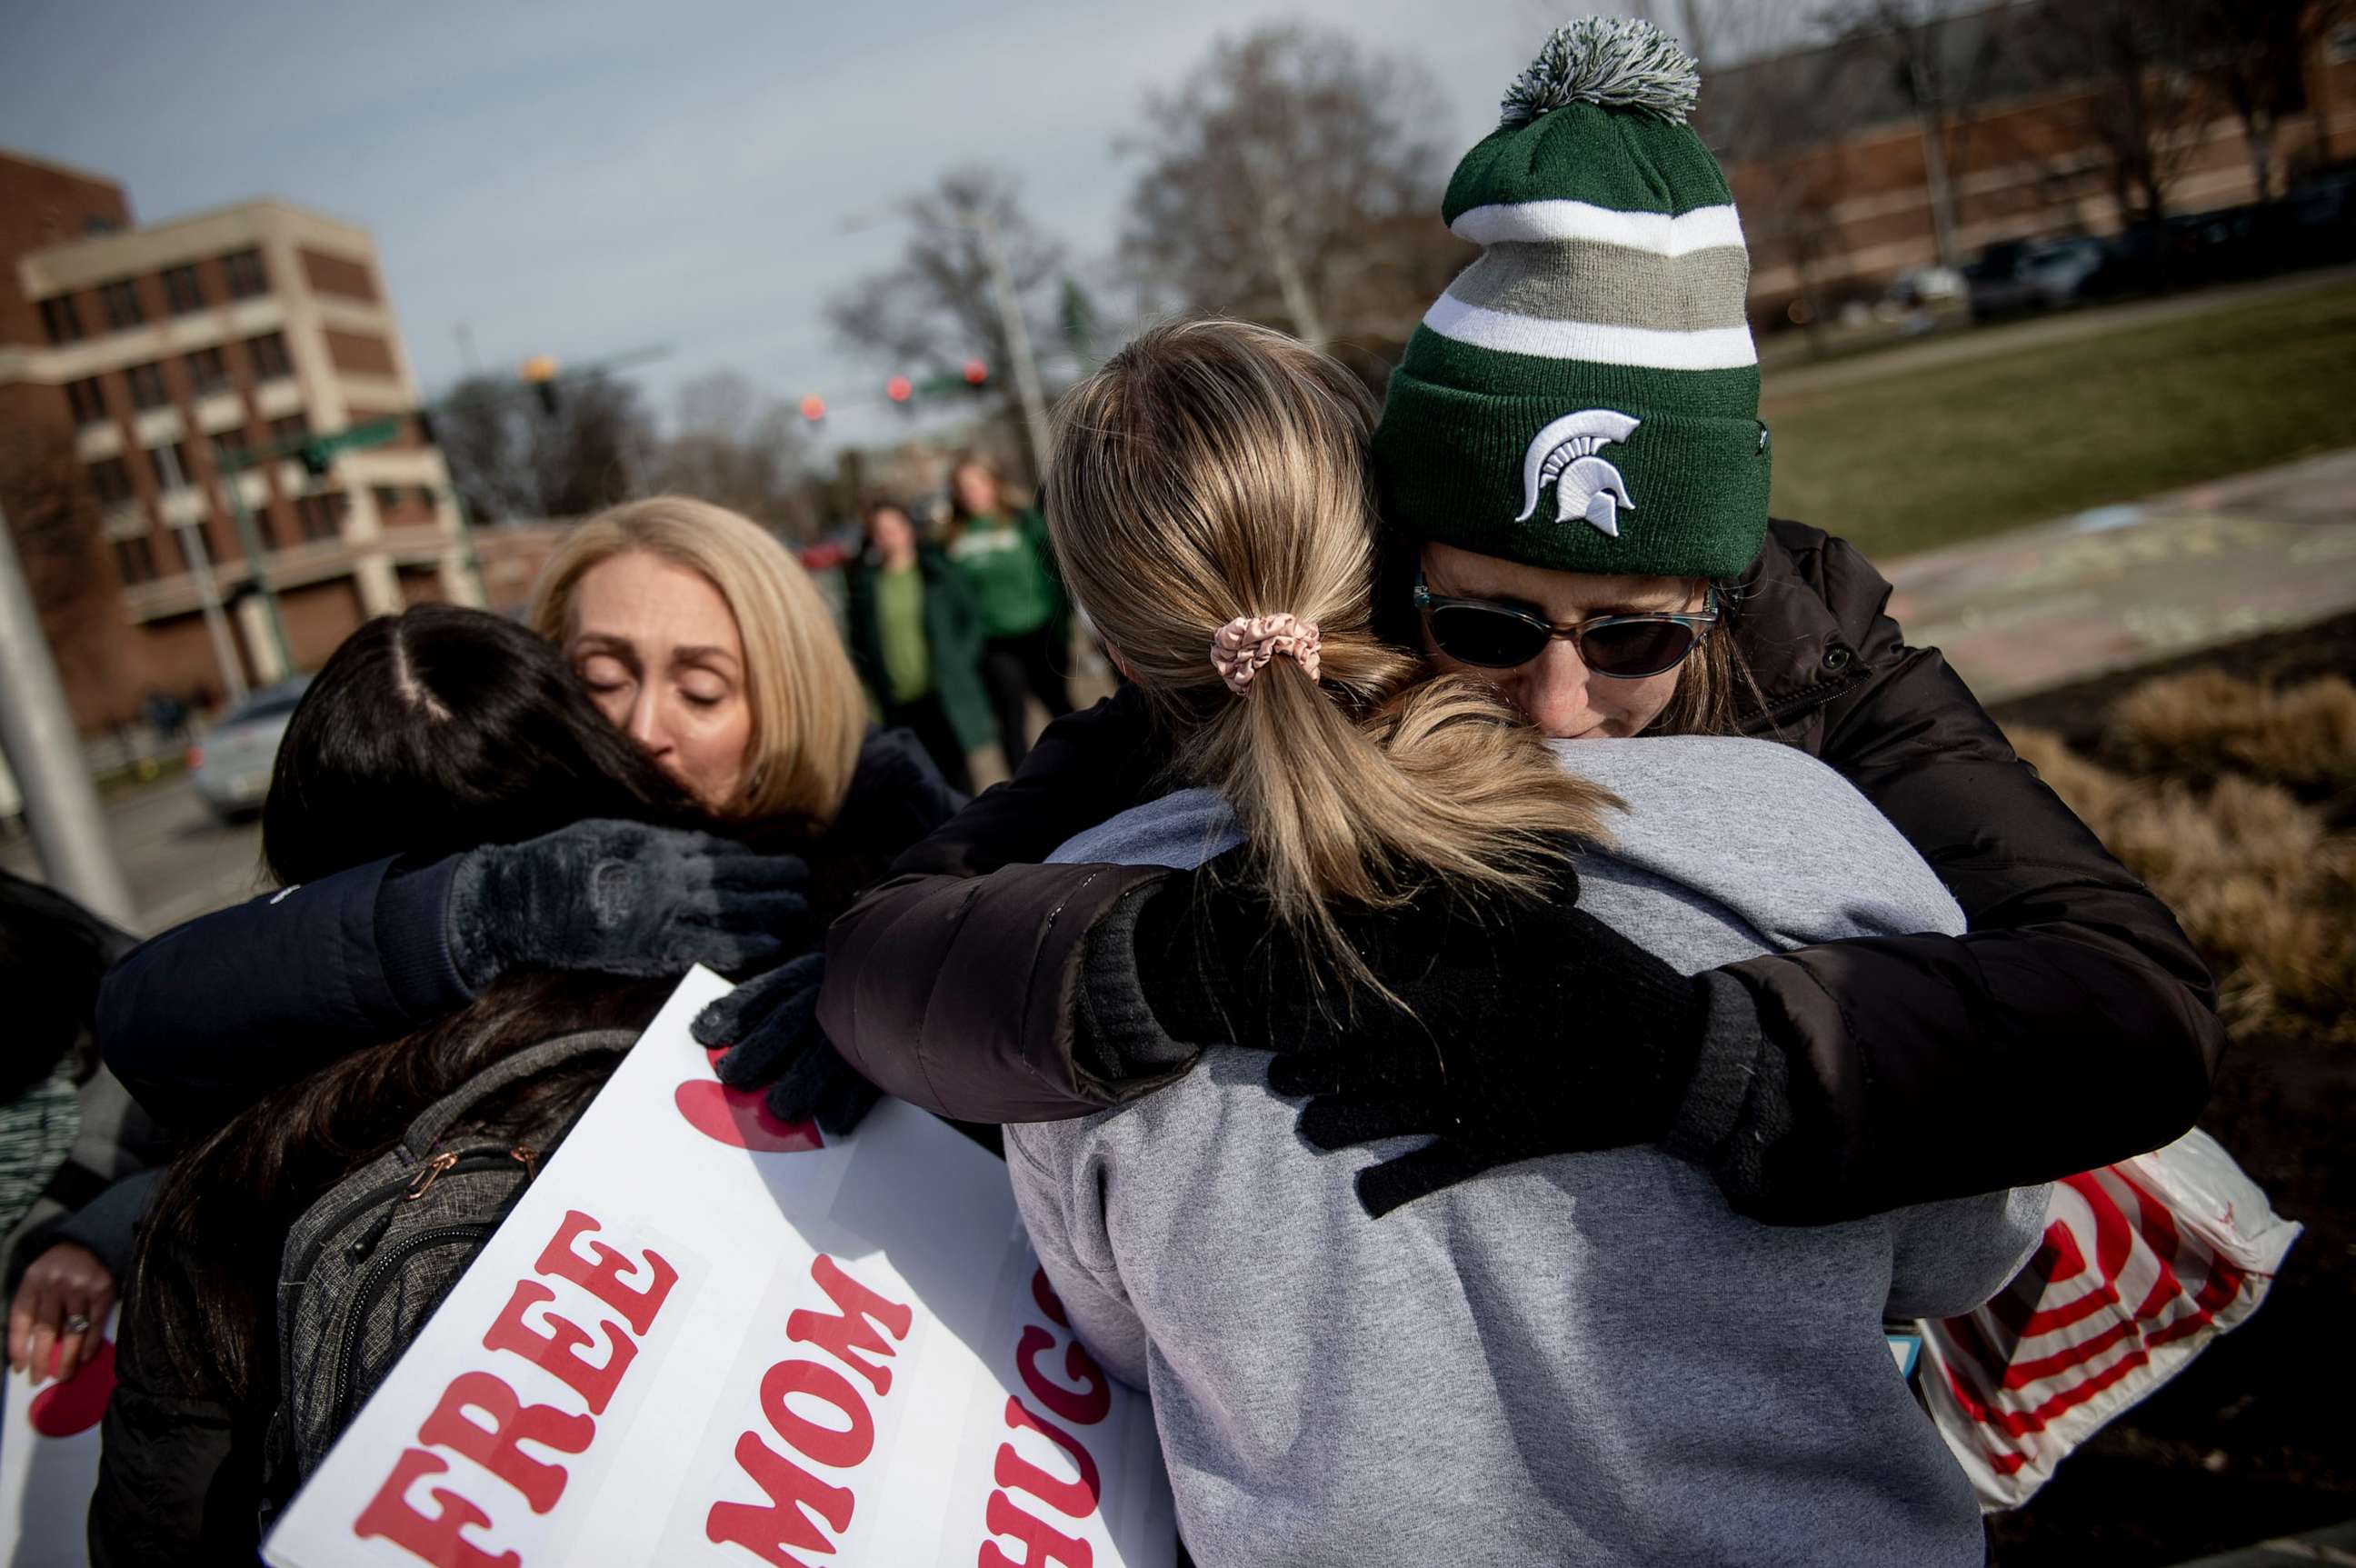 PHOTO: Sue Dodde, a mother from Conklin at right, embraces a student with a "free hug from a mom" as campus opens back up for the first day of classes, Feb. 20, 2023, at Michigan State University in East Lansing, Mich.